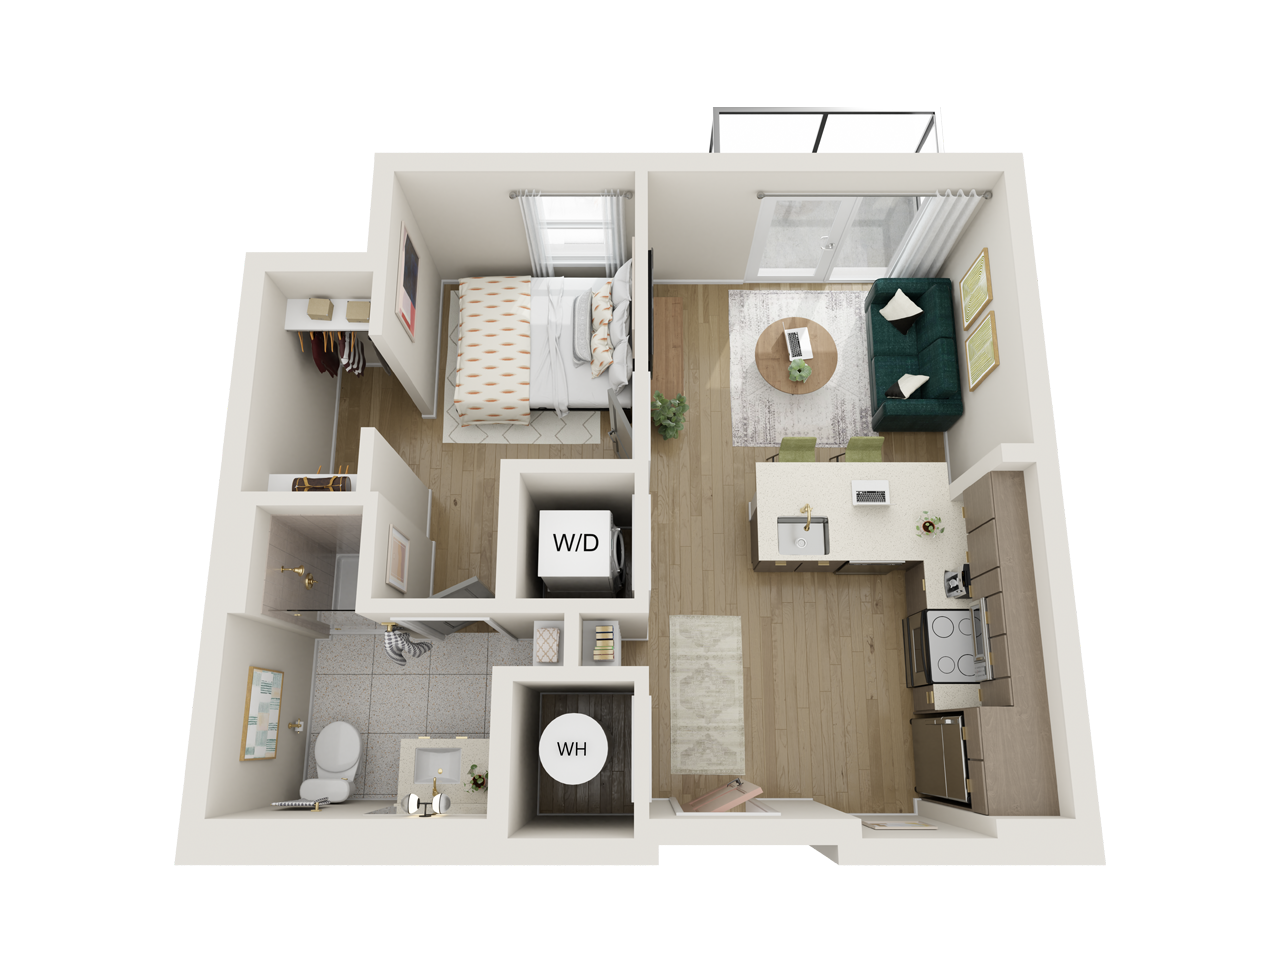 The Pearl, a 1x1 floor plan at Sweetwater